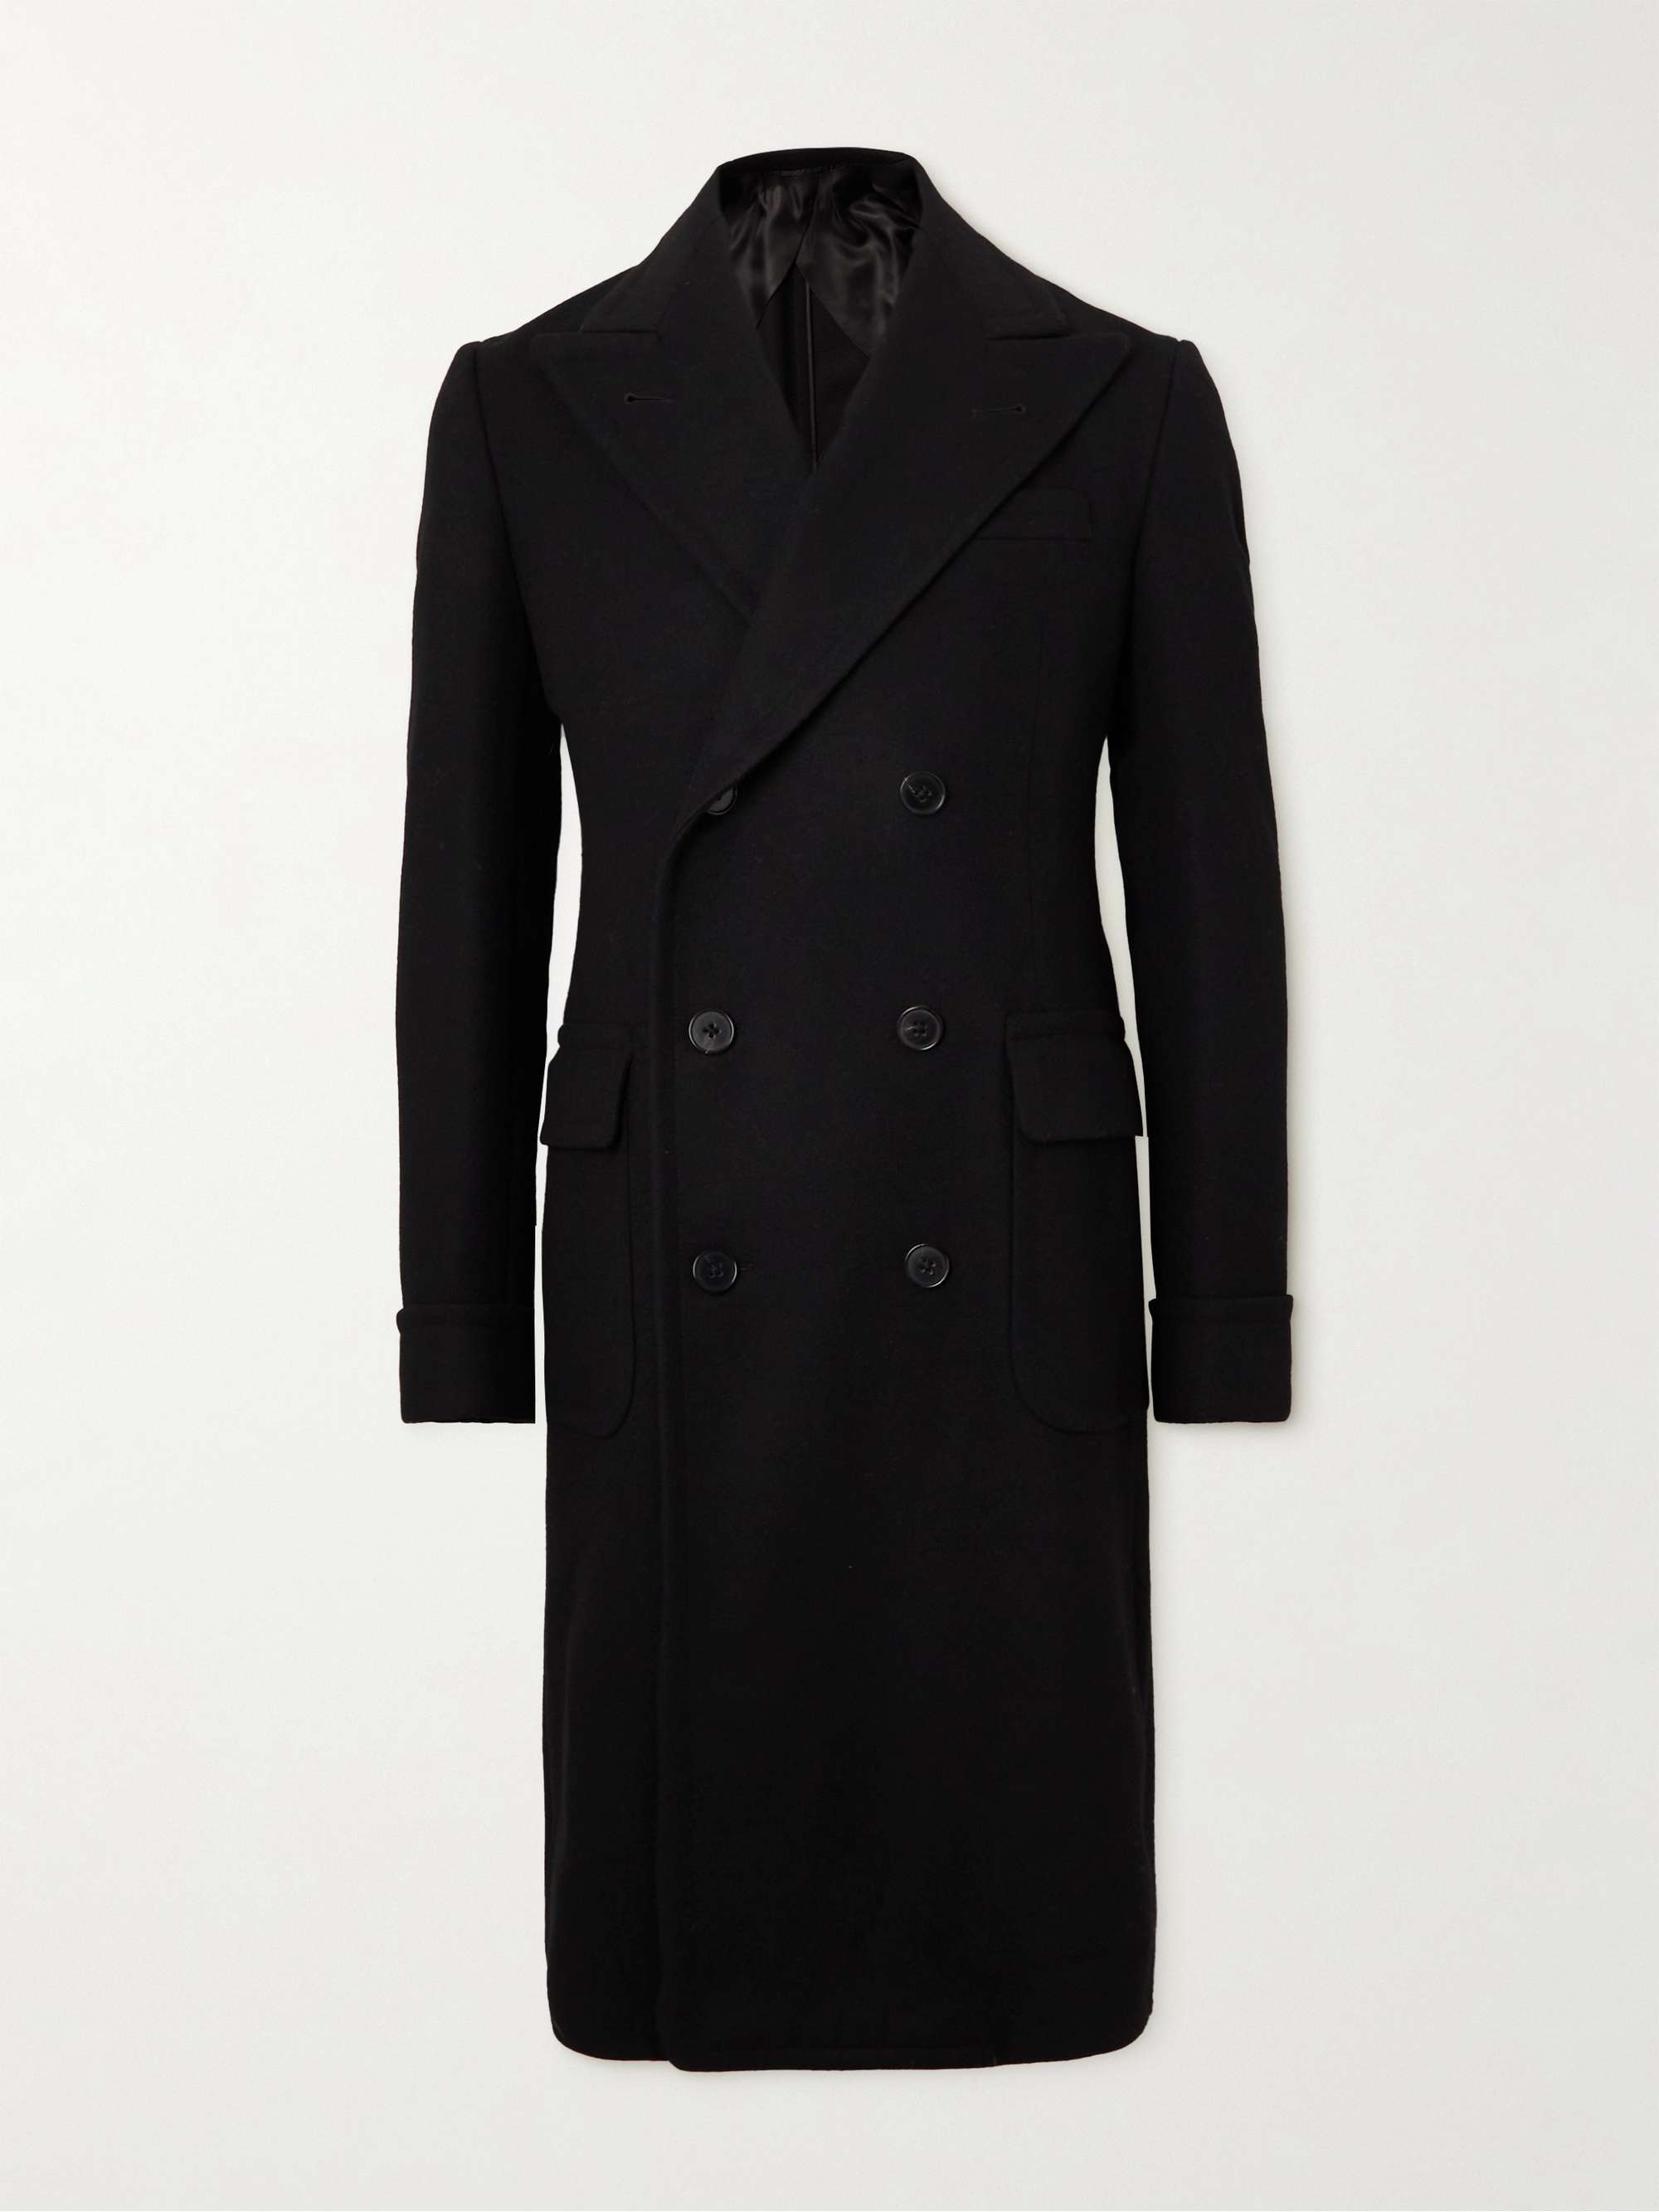 Gray Double-Breasted Wool and Cashmere-Blend Coat | RALPH LAUREN PURPLE  LABEL | MR PORTER